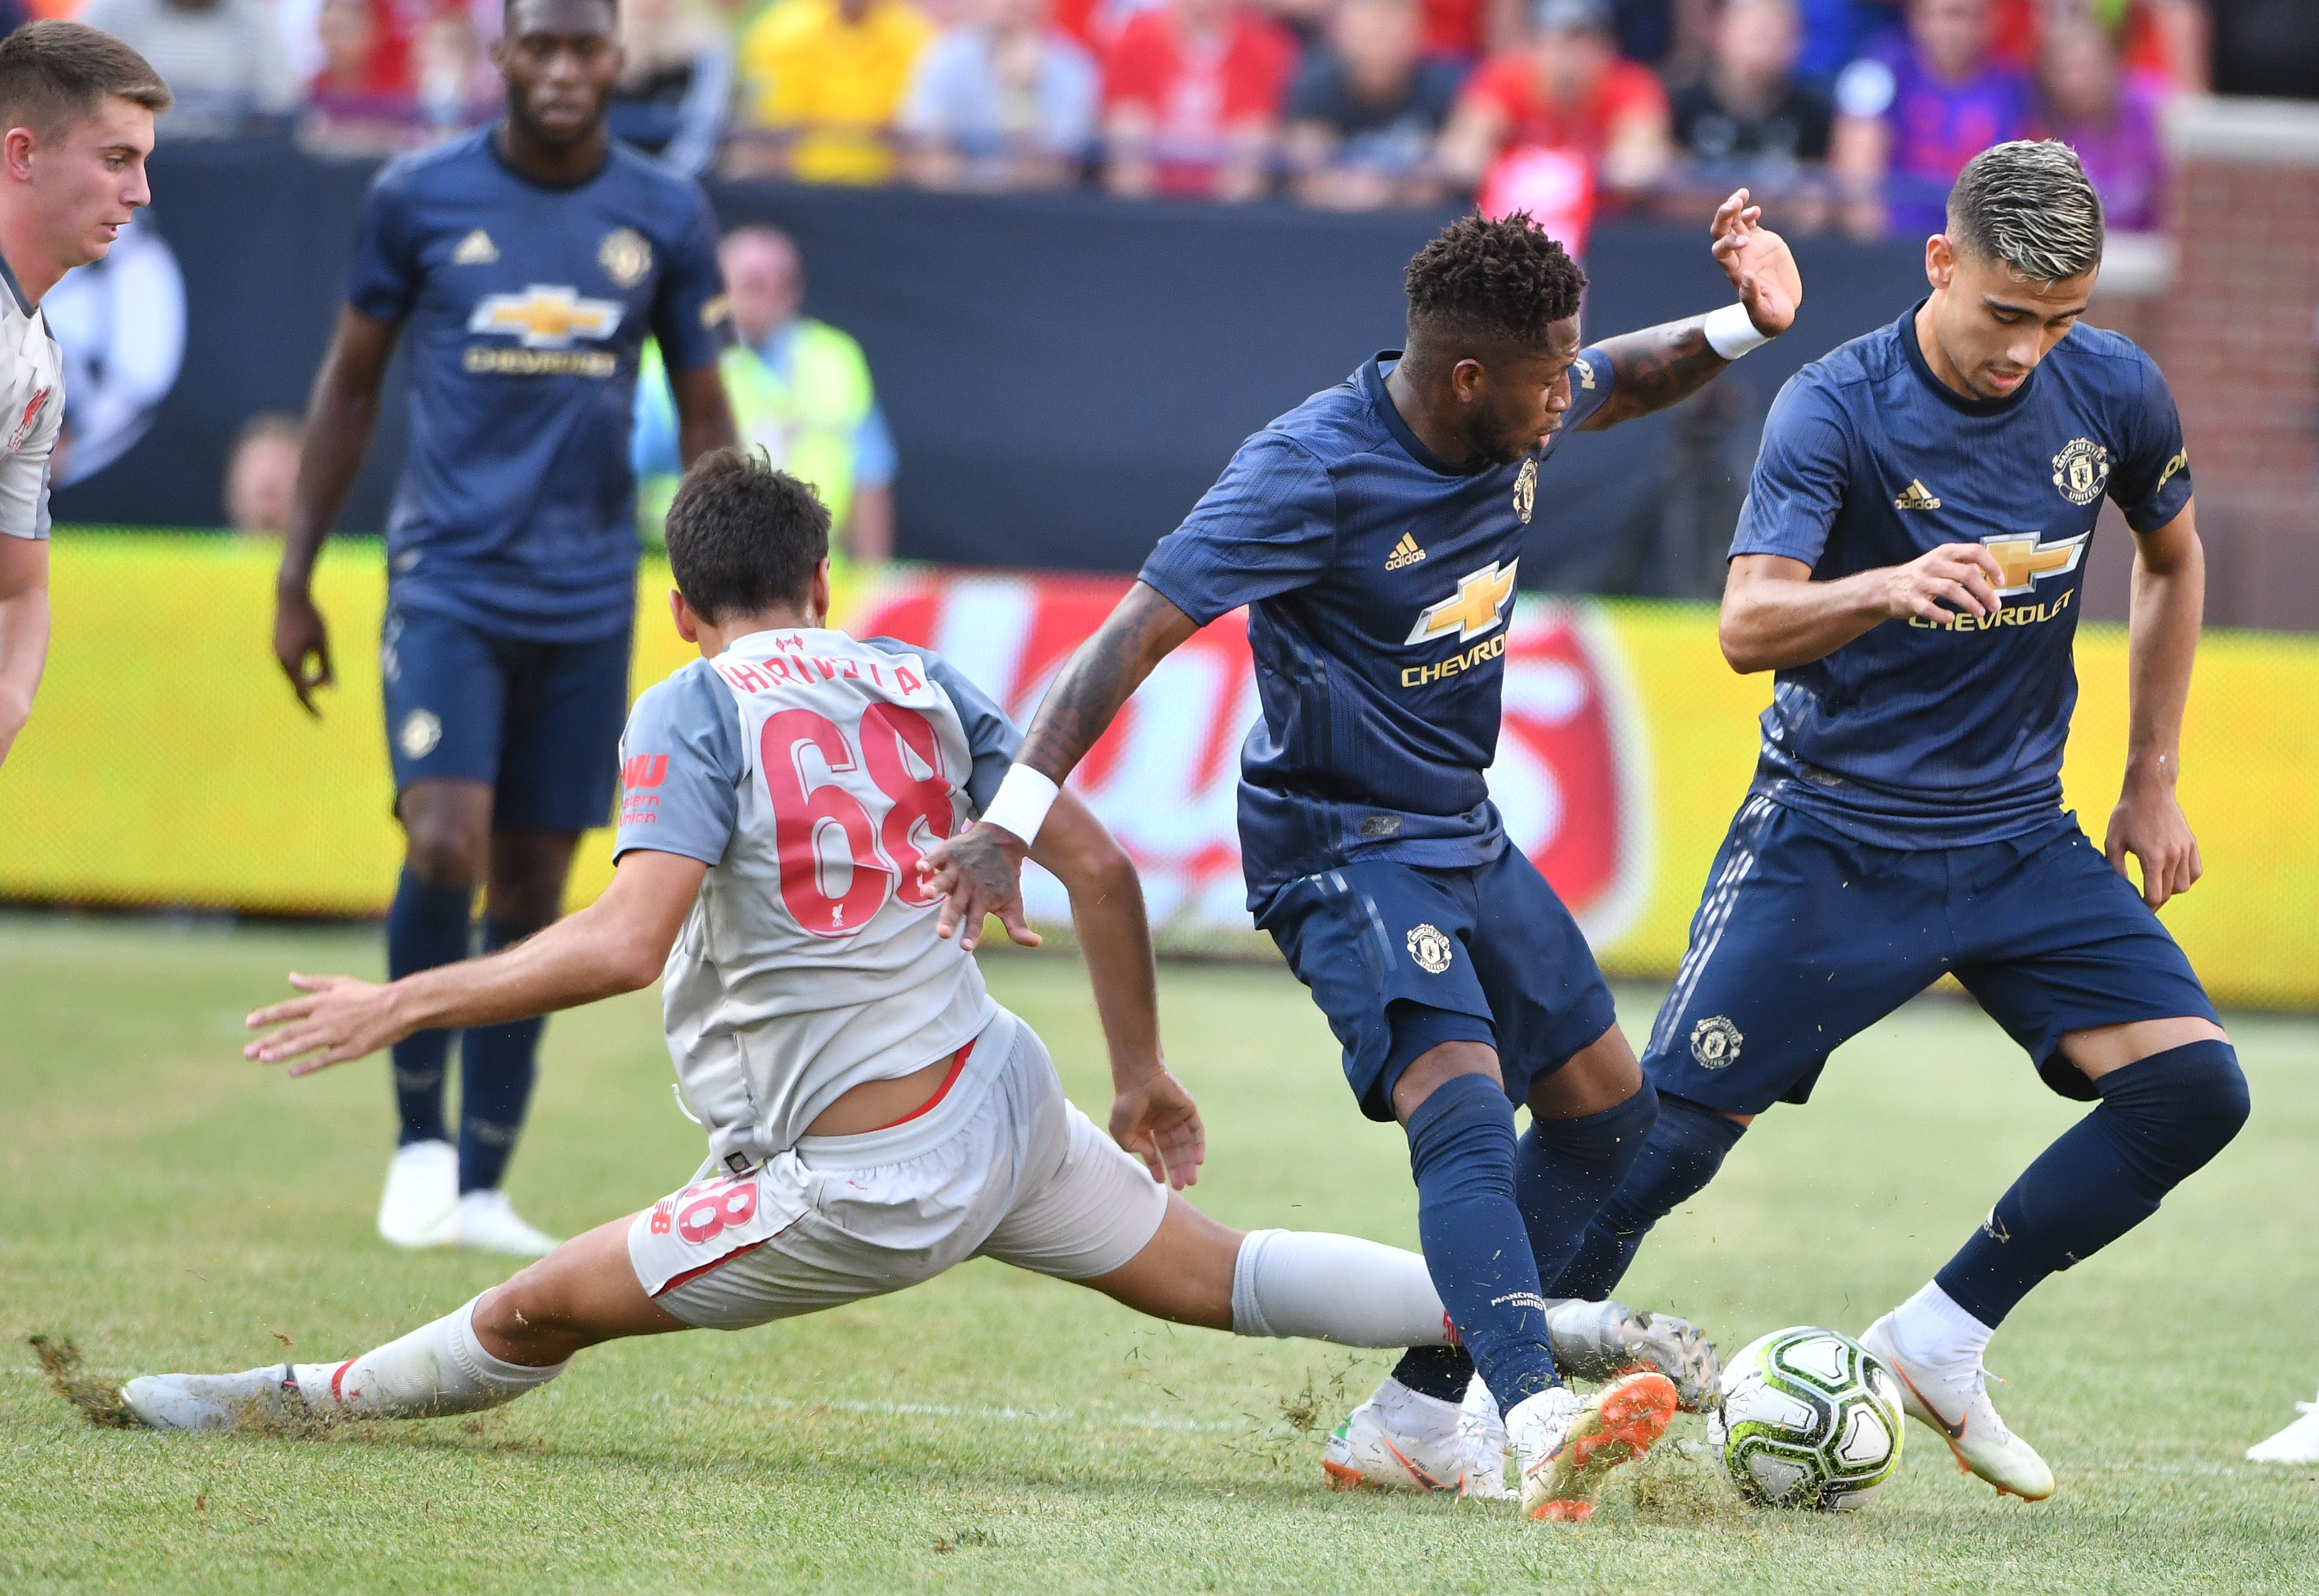 Liverpool's Pedro Chirivella defends against Manchester's Fred and Andreas Pereira in the second half.